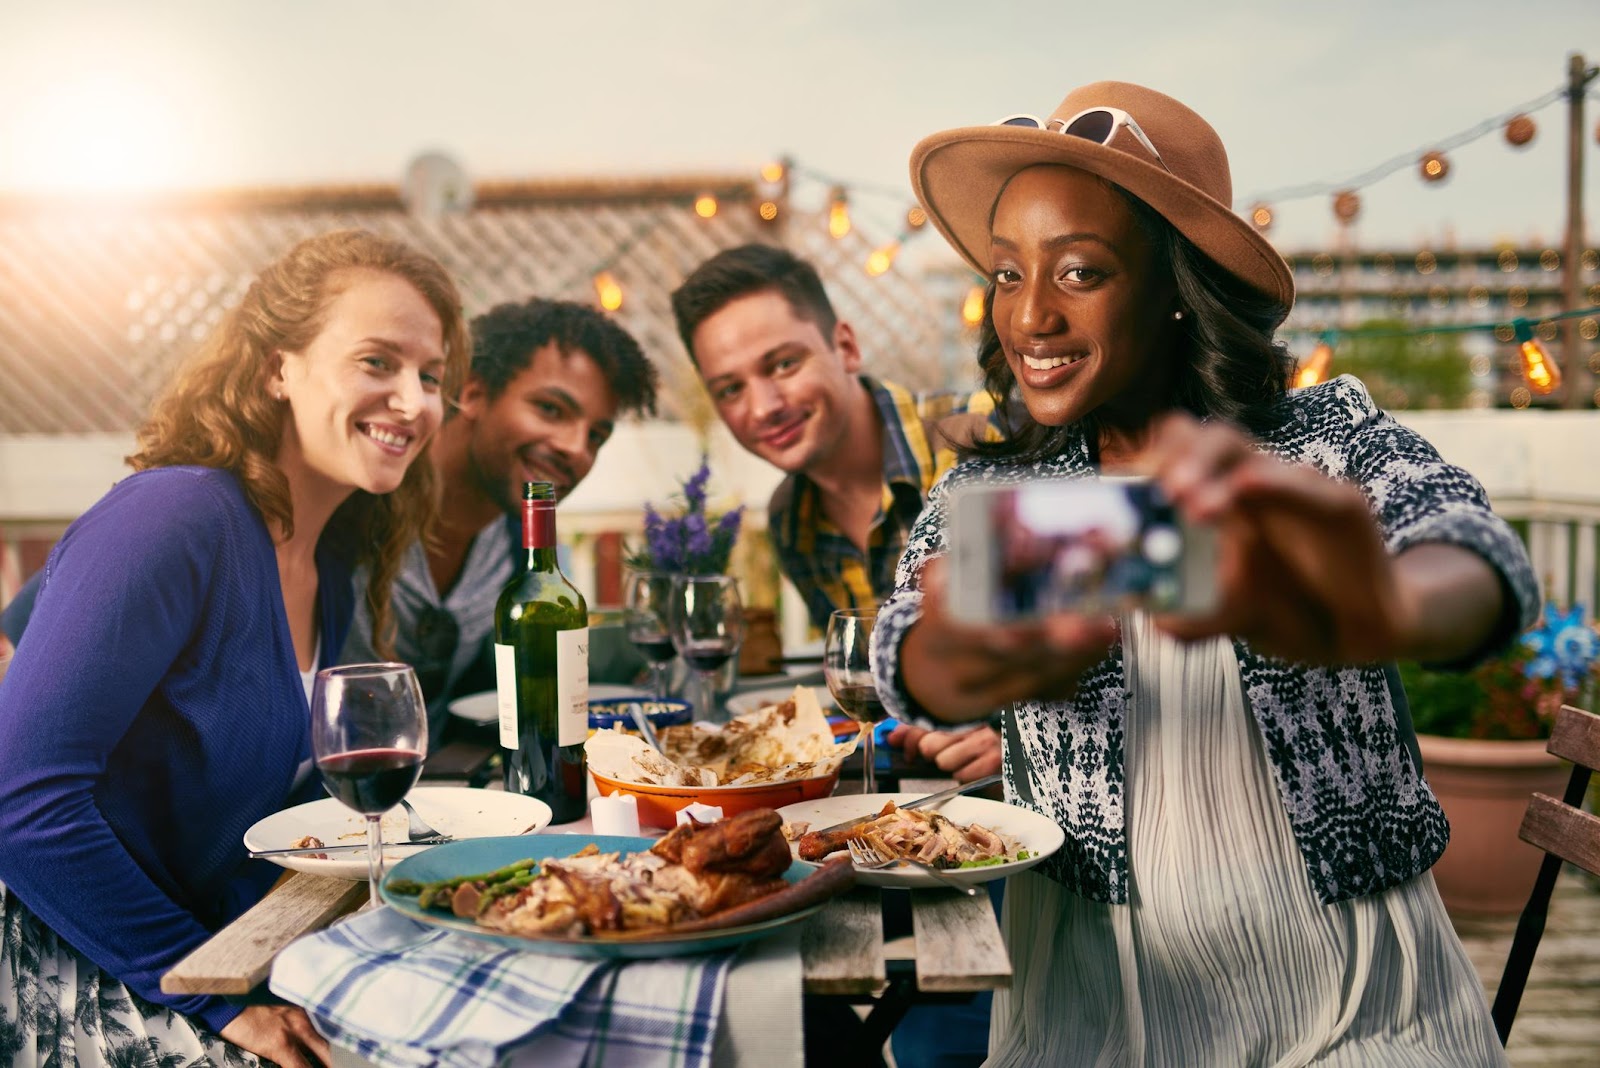 A group of people eating and taking a selfie

Description automatically generated